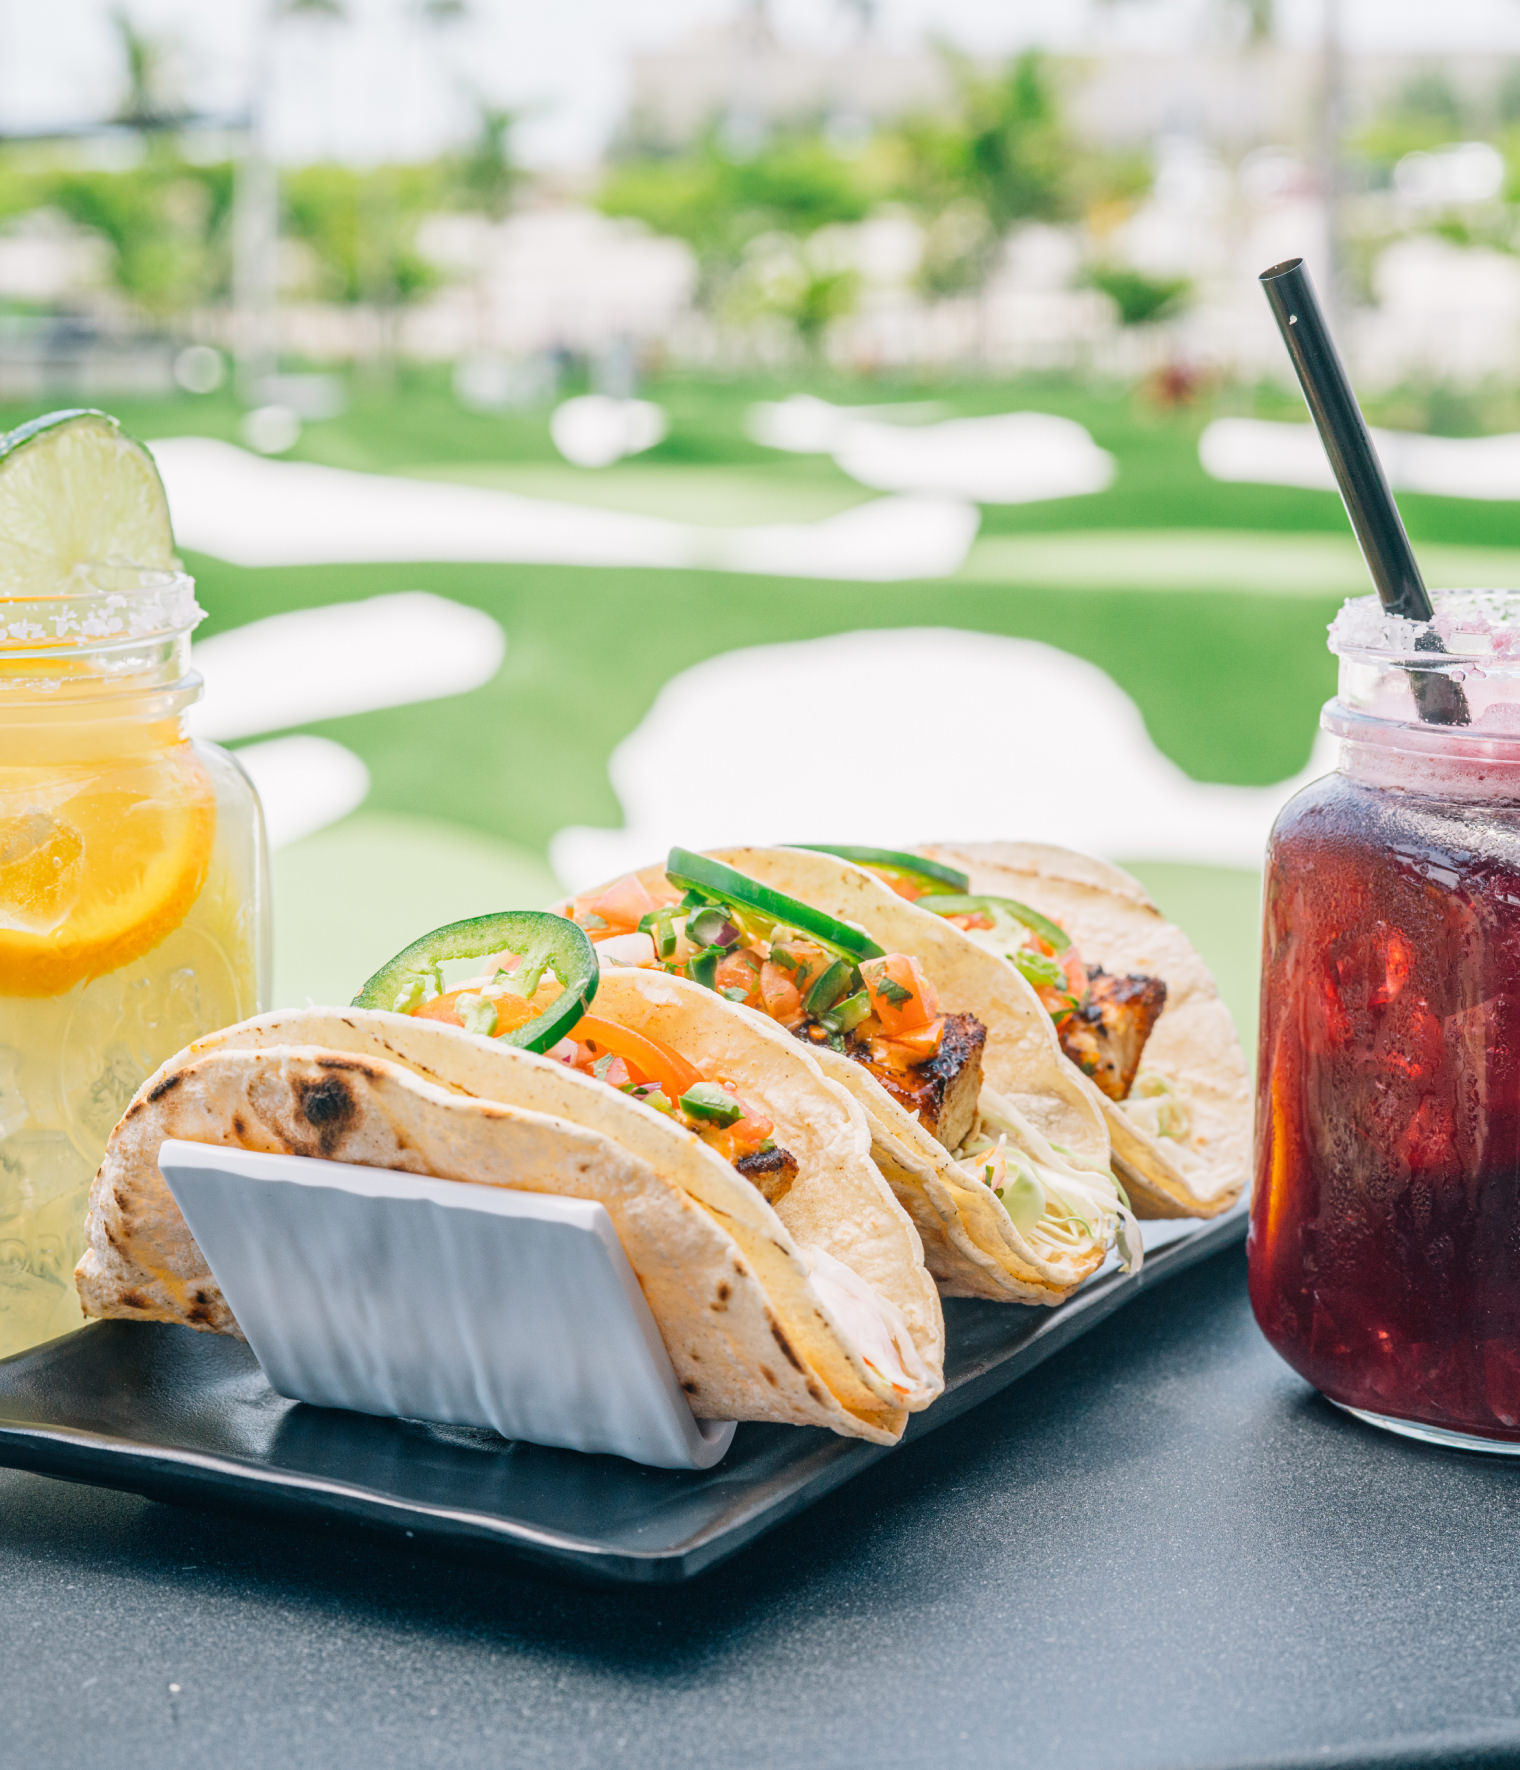 A plate of tacos and a drink on a table outdoors.